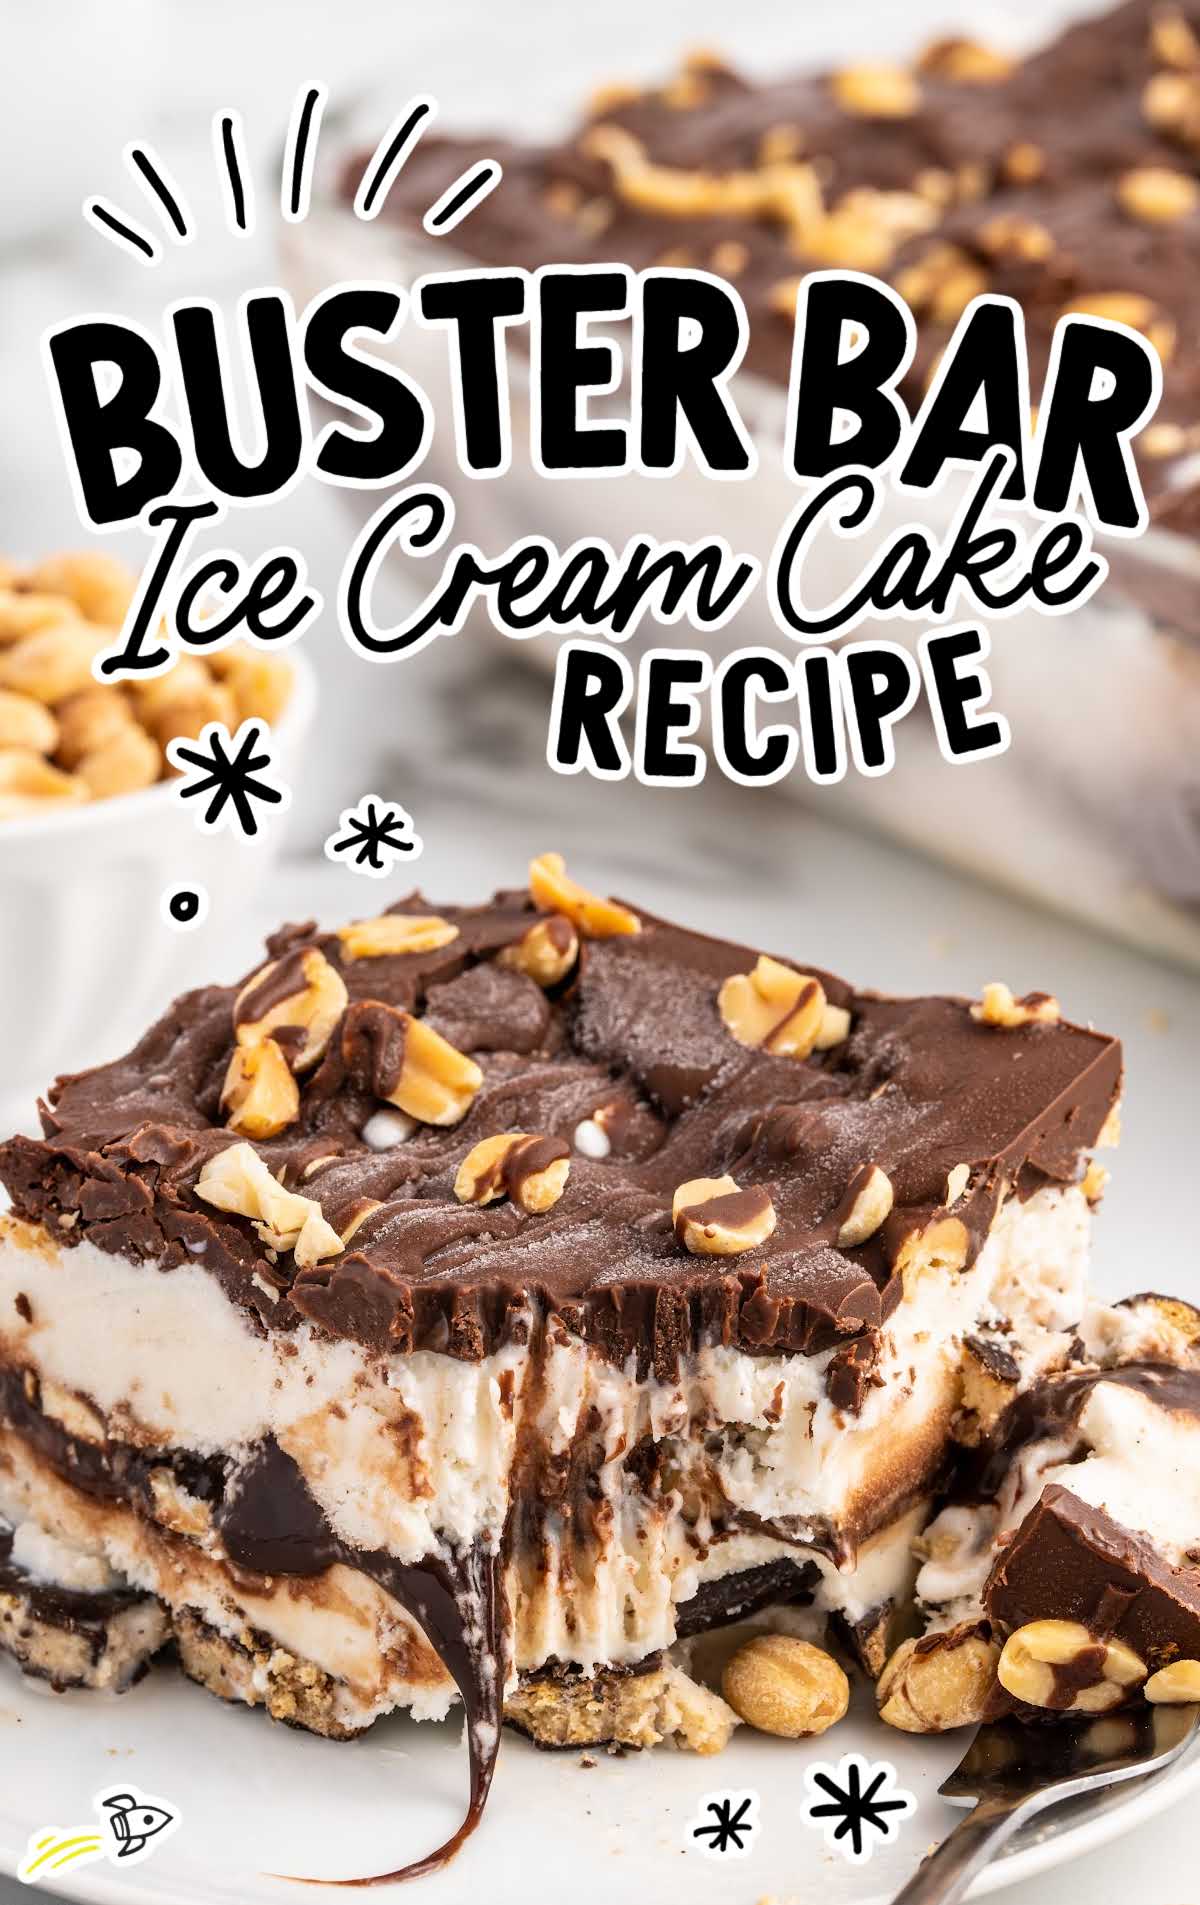 a close up shot of a piece of Buster Bar Ice Cream Cake on a plate with a piece taken out of it